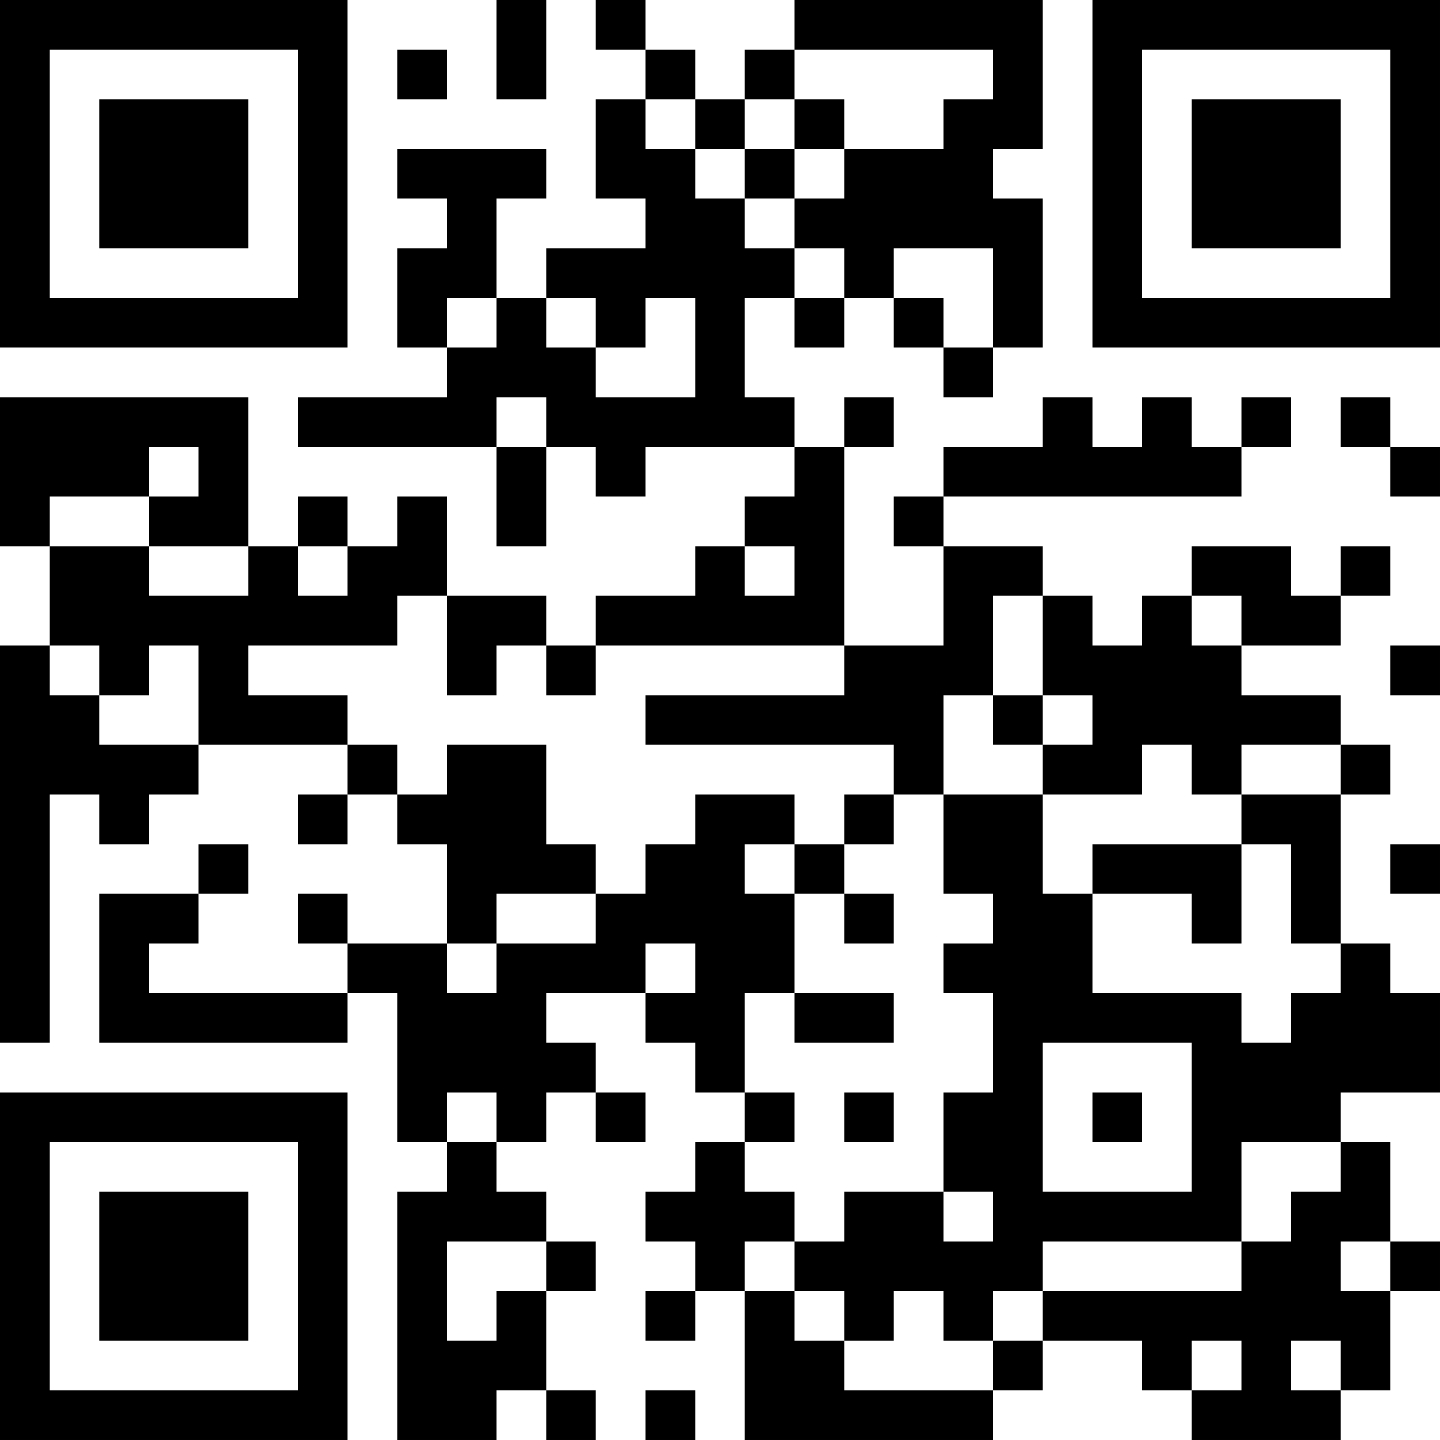 Scan this QR code to download the Peggy app on your device.